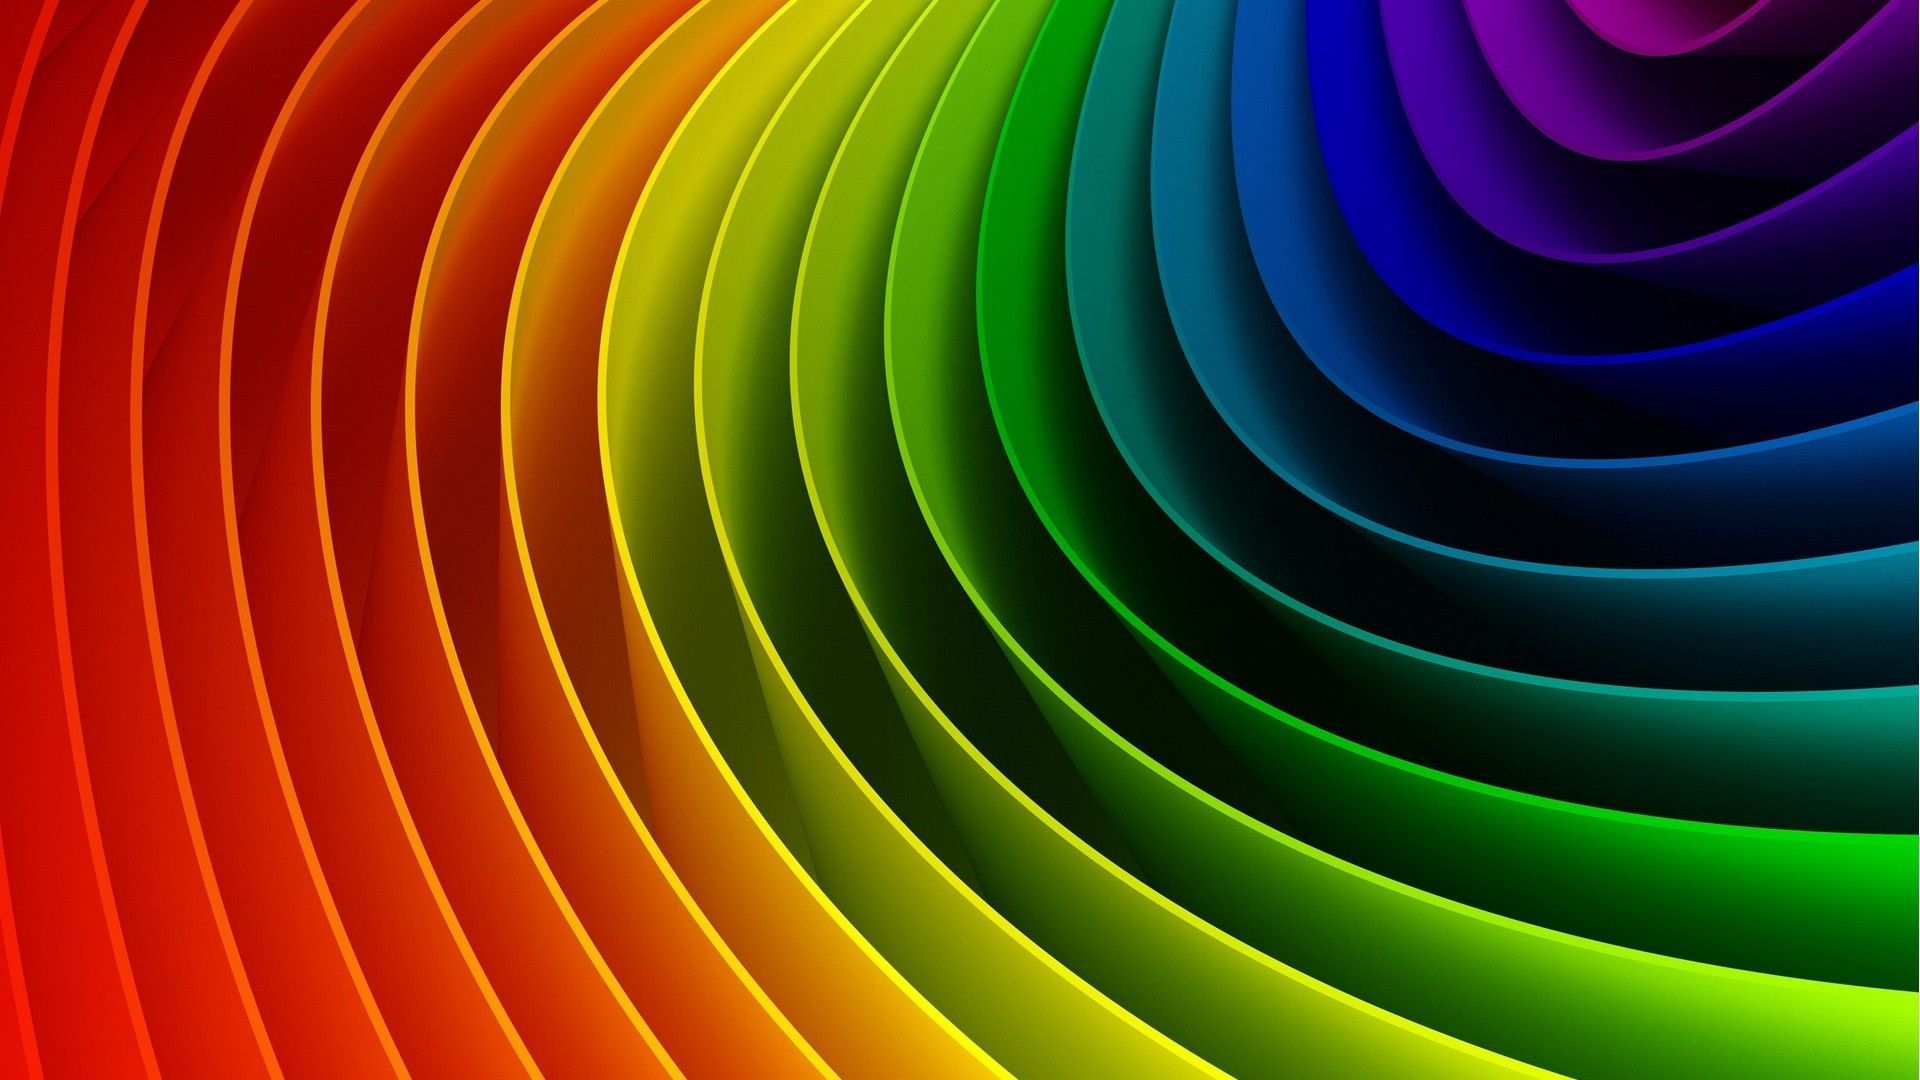 Abstract Rainbow Wallpaper Free Abstract Rainbow Background